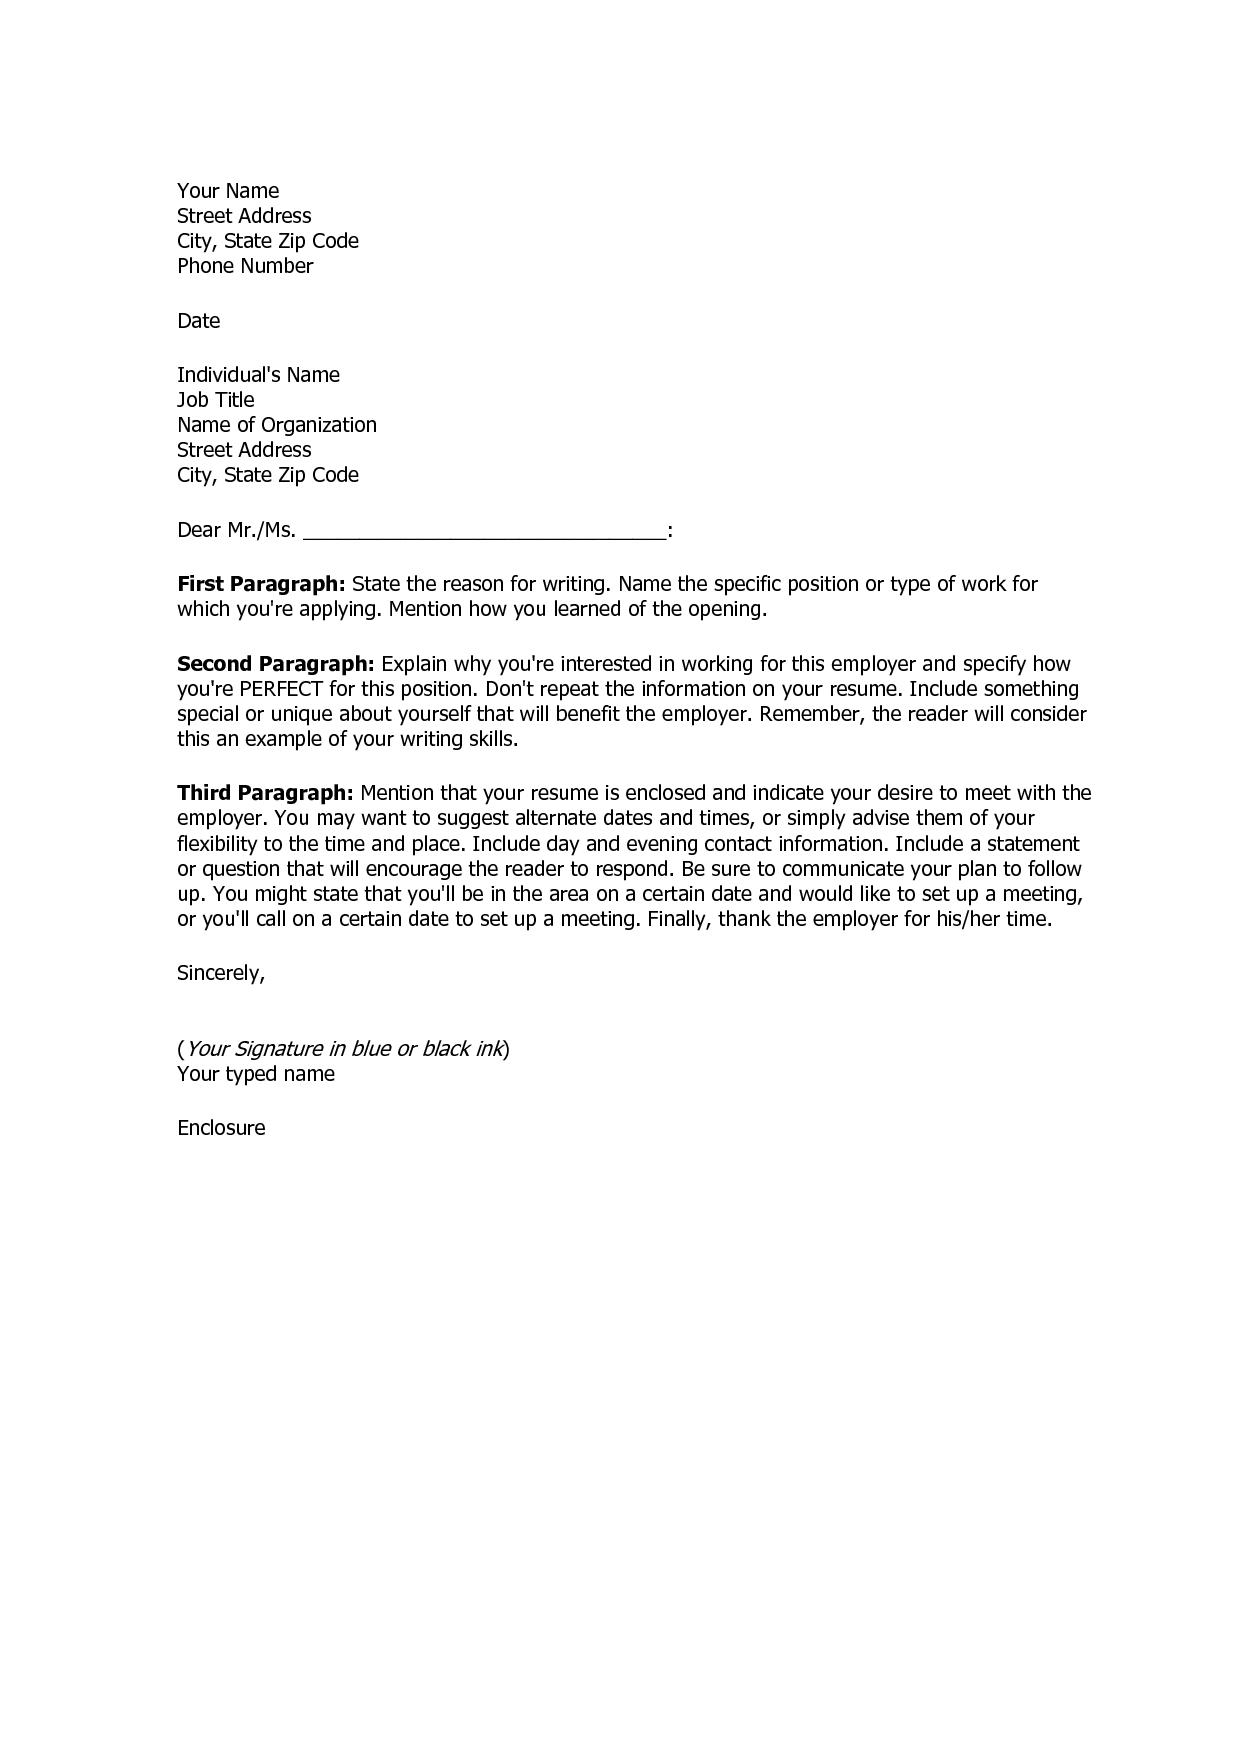 images of cover letters for resumes